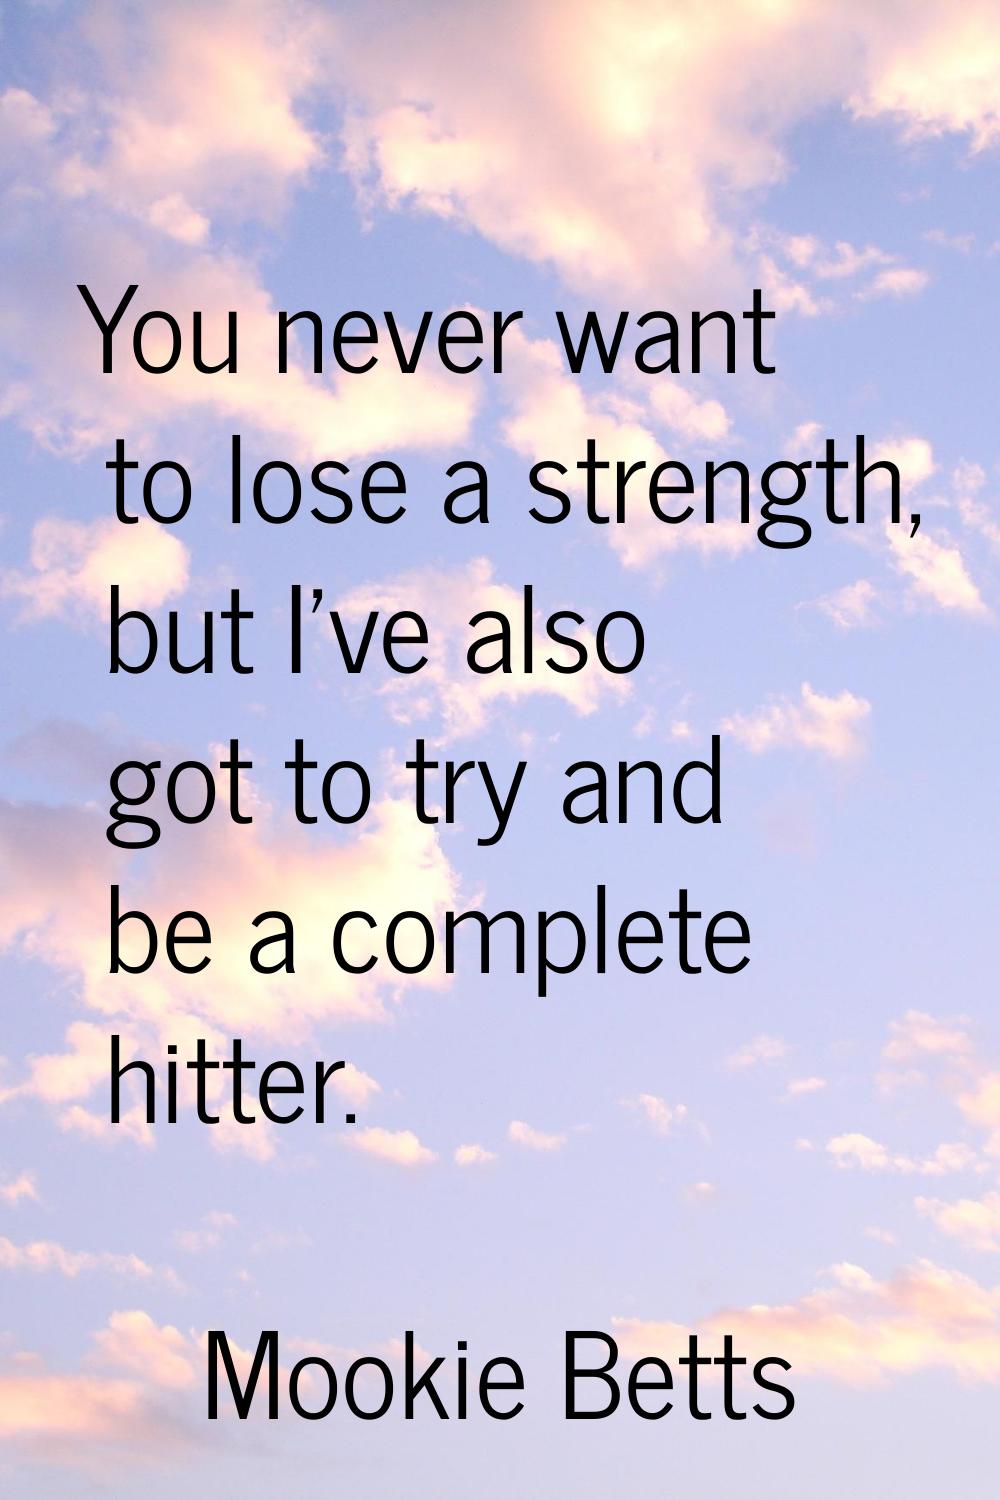 You never want to lose a strength, but I've also got to try and be a complete hitter.